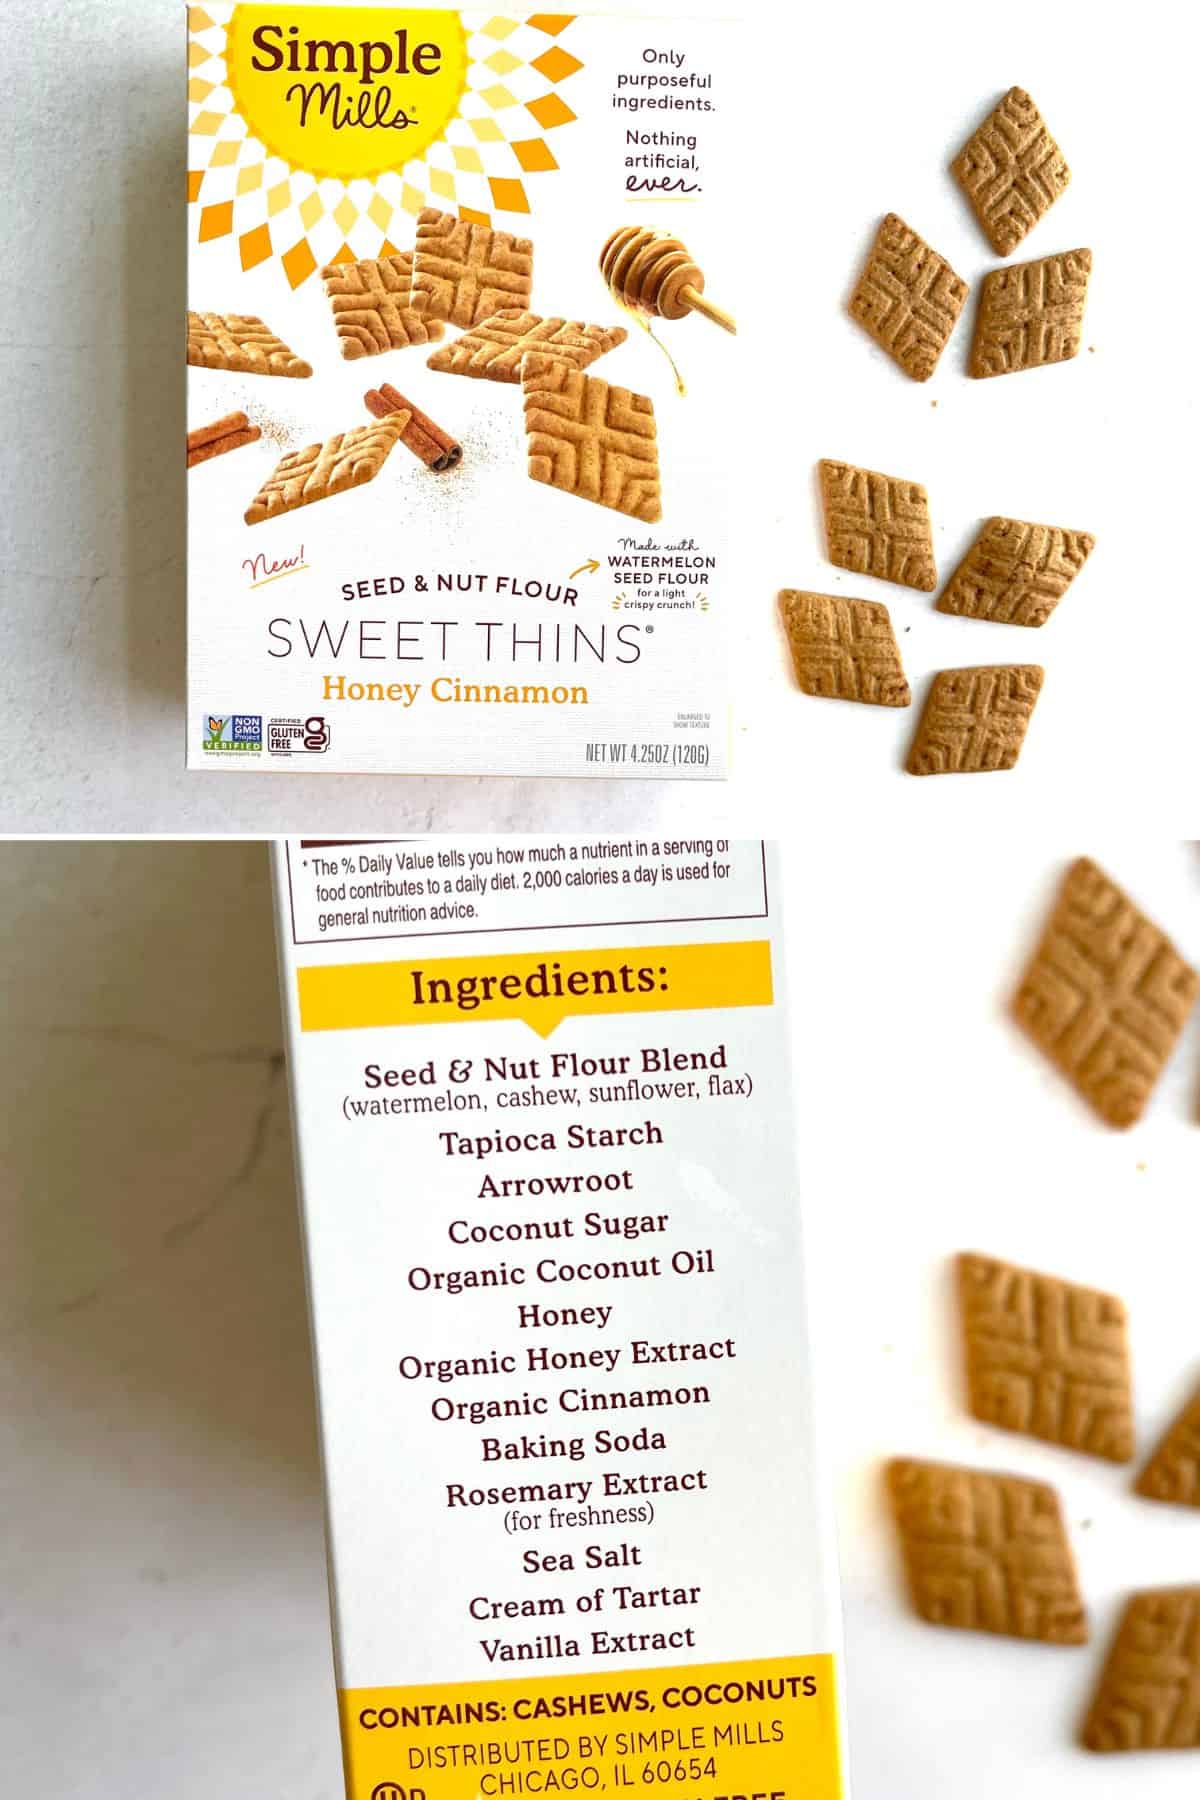 A box of Simple Mills graham crackers on a countertop